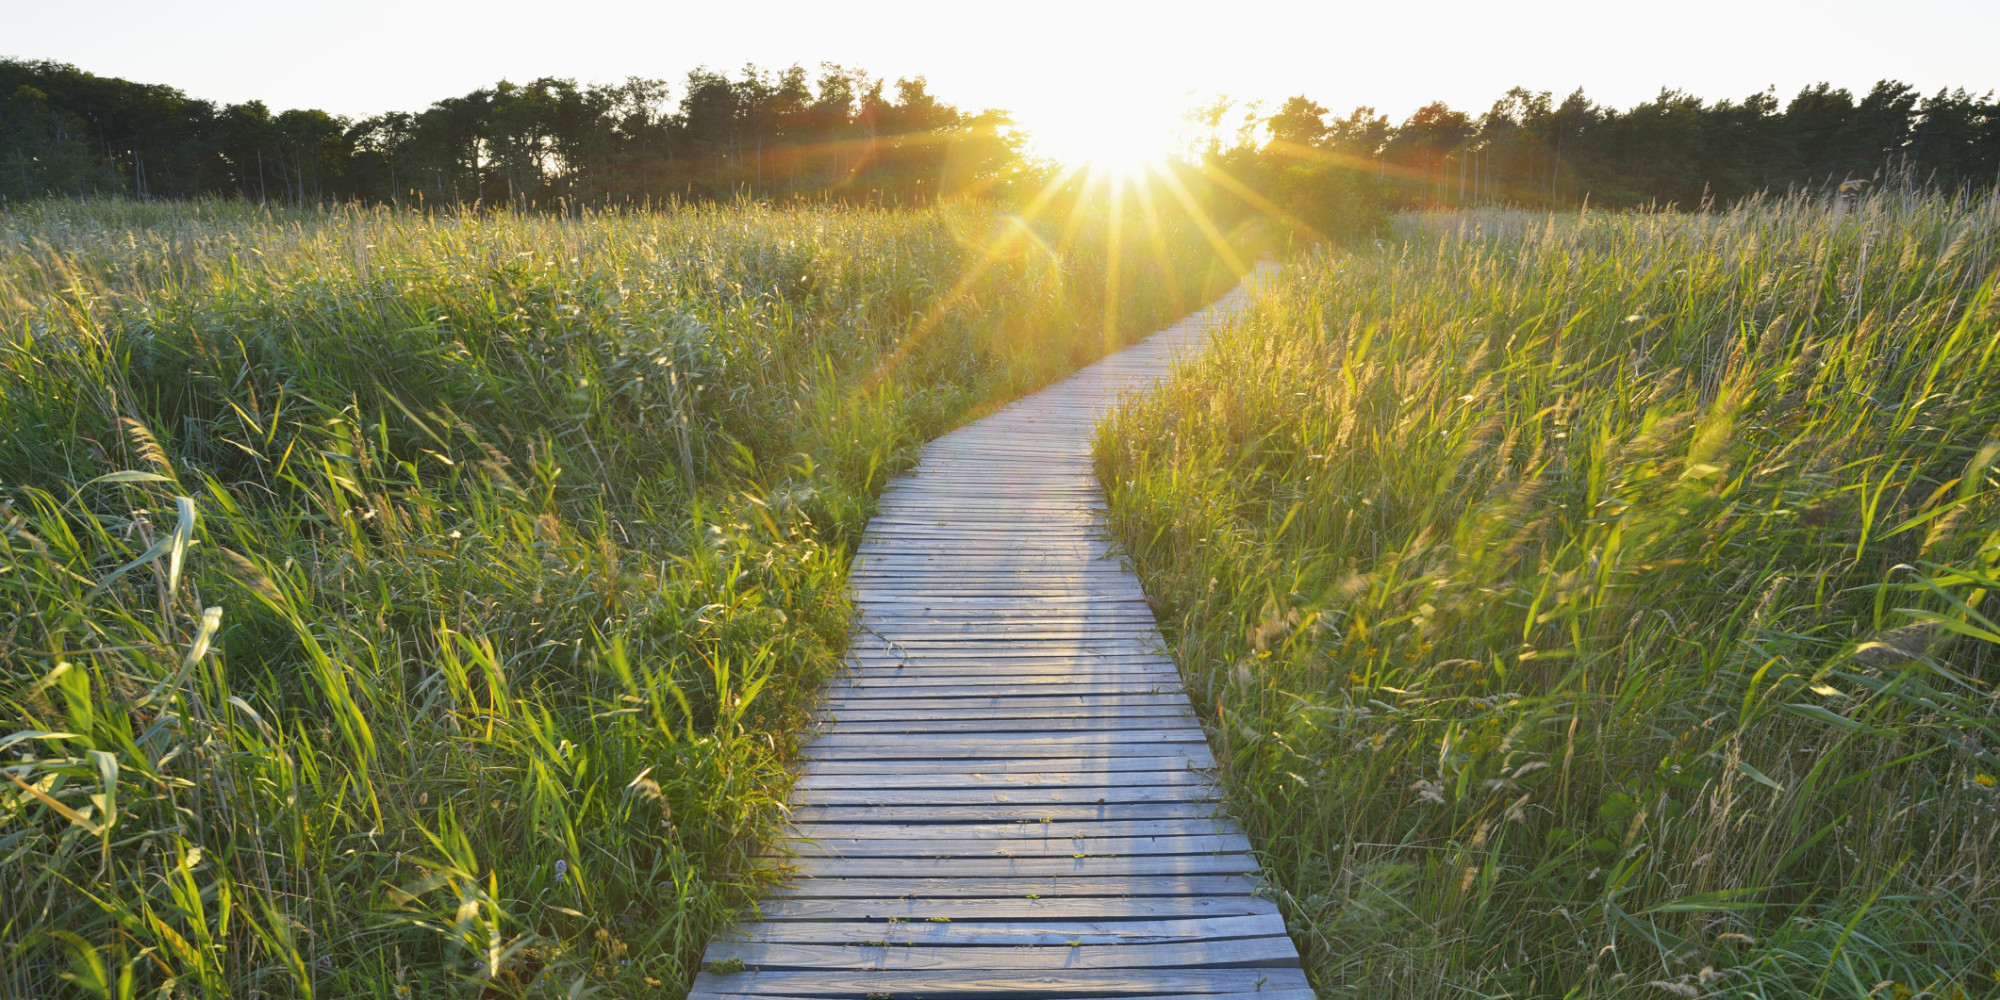 Find Your Own Path Through Life | HuffPost